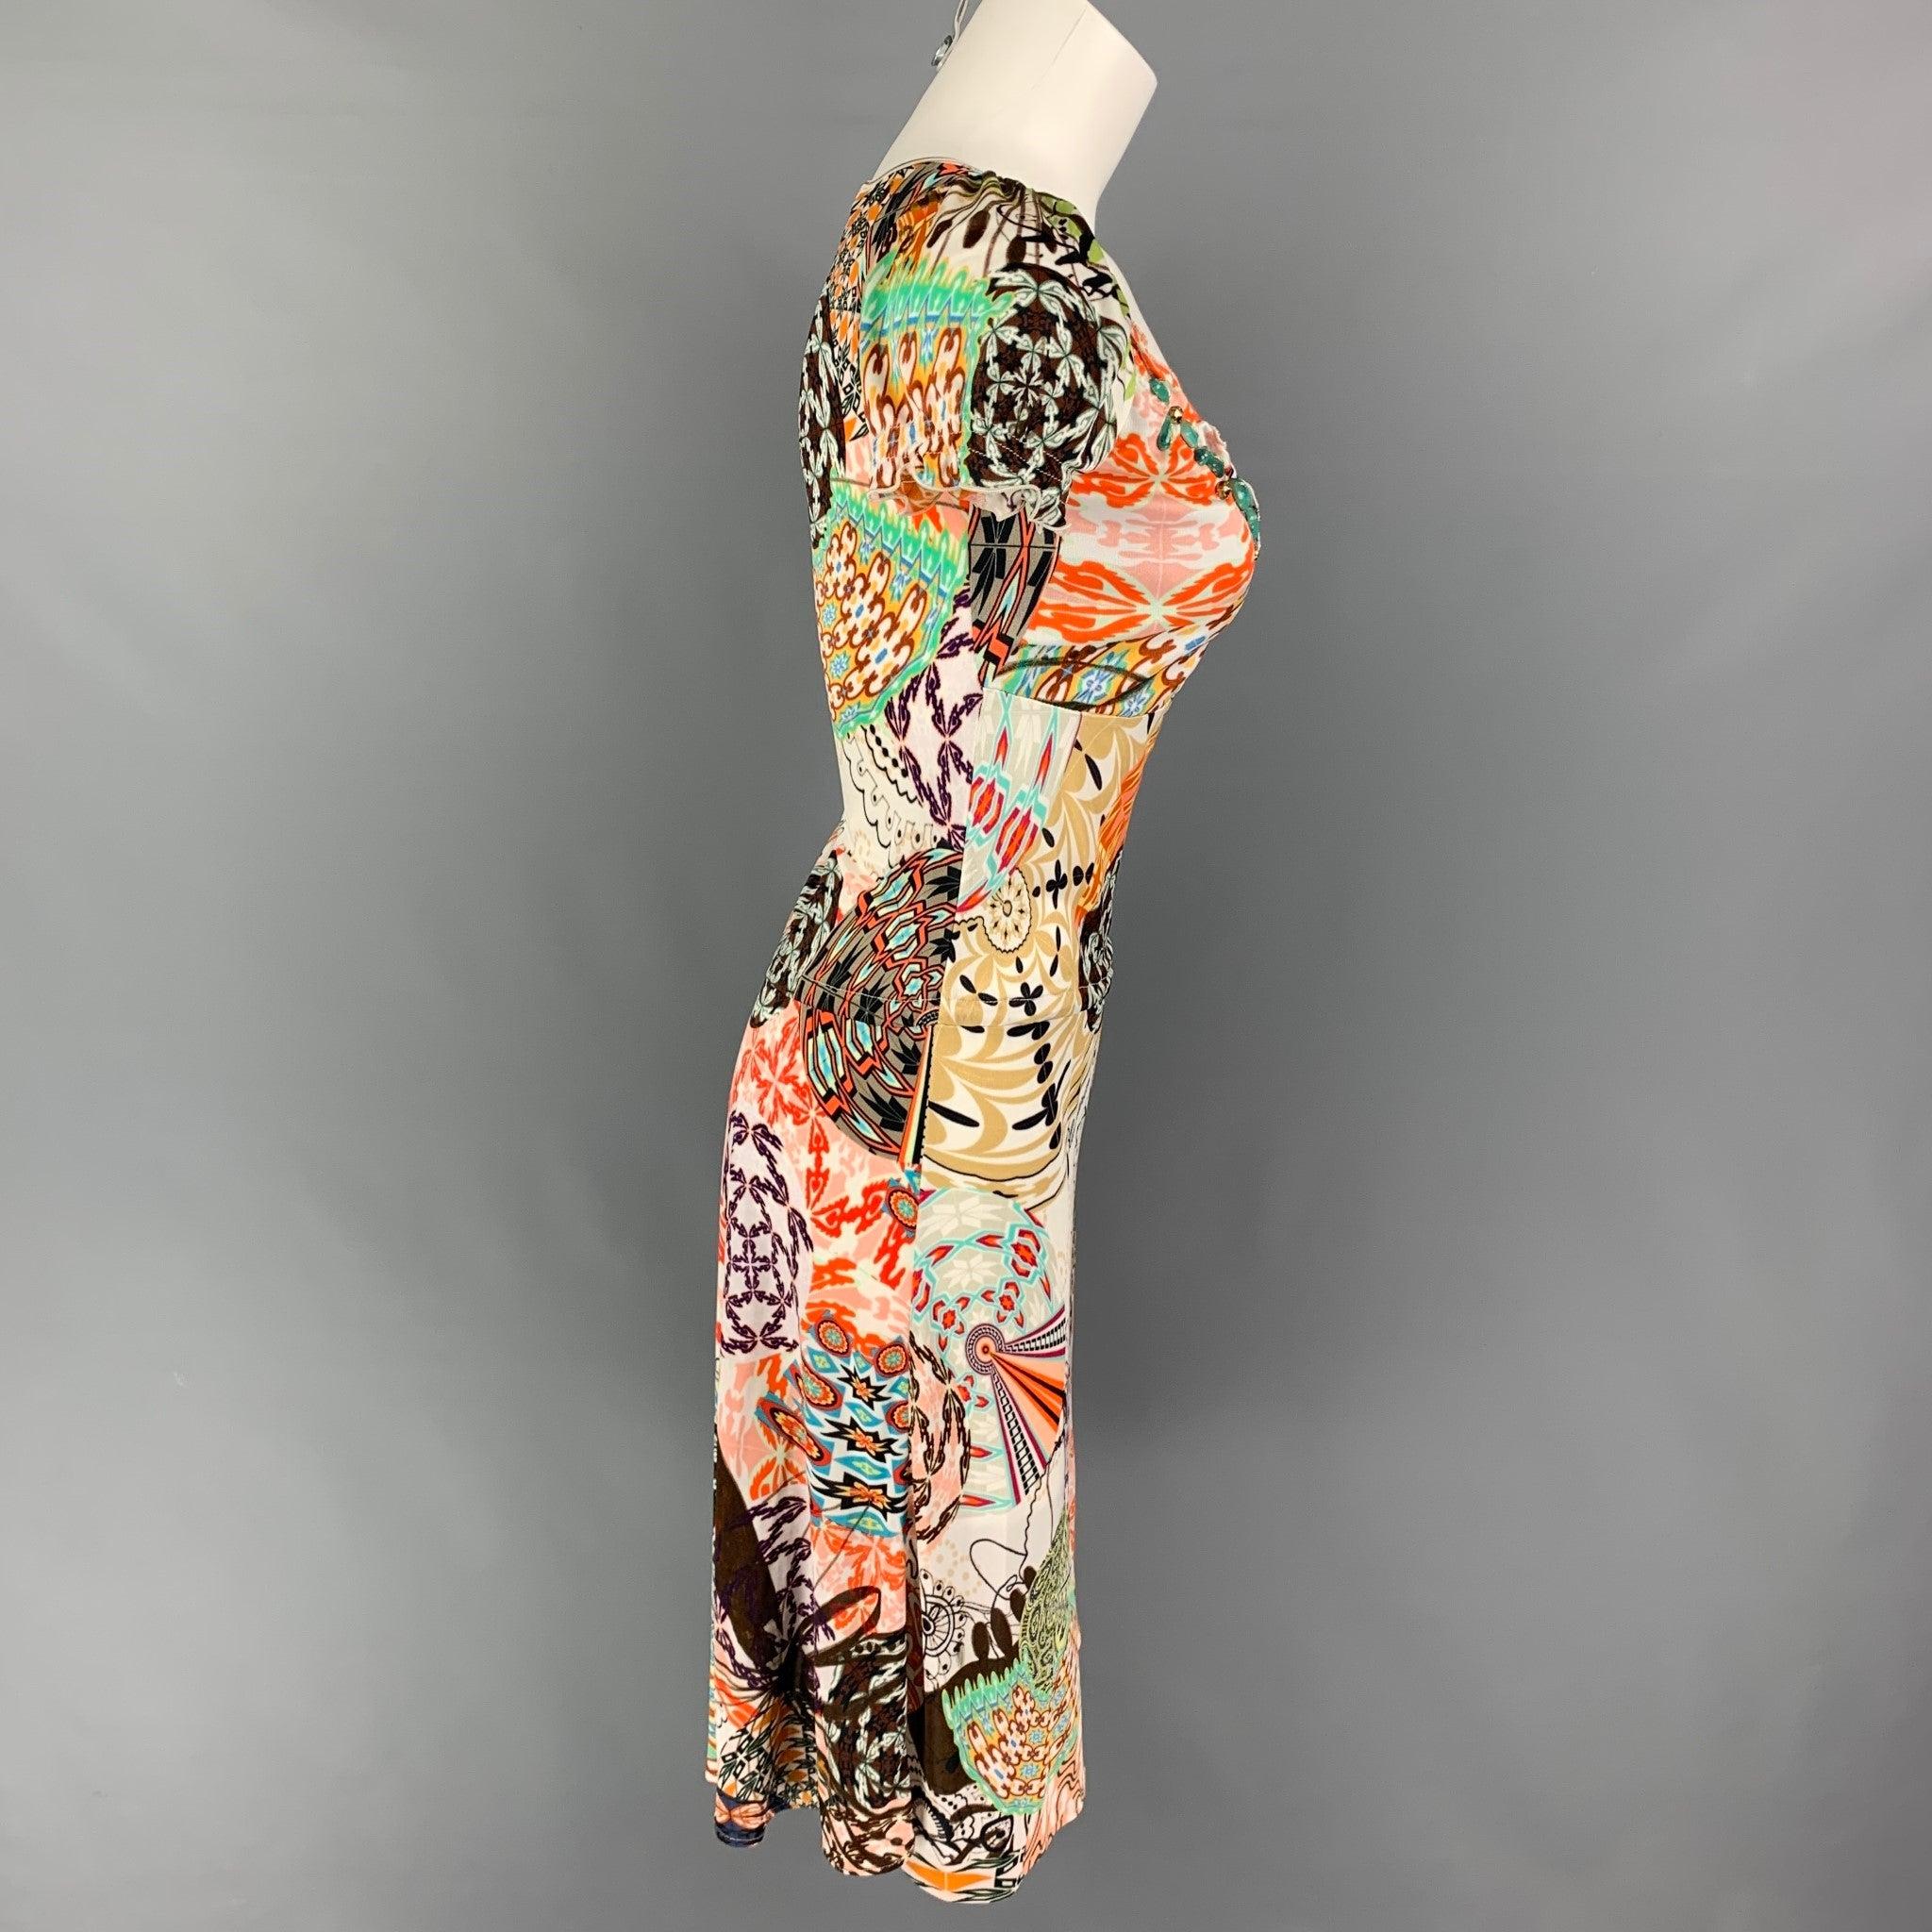 BLUEMARINE dress comes in a multi-color abstract print acetate blend featuring a elastic waist, crystal embellishments, and a v-neck. Made in Italy.
Very Good
Pre-Owned Condition. 

Marked:   I 38 / D 32 

Measurements: 
 
Shoulder: 10 inches  Bust: